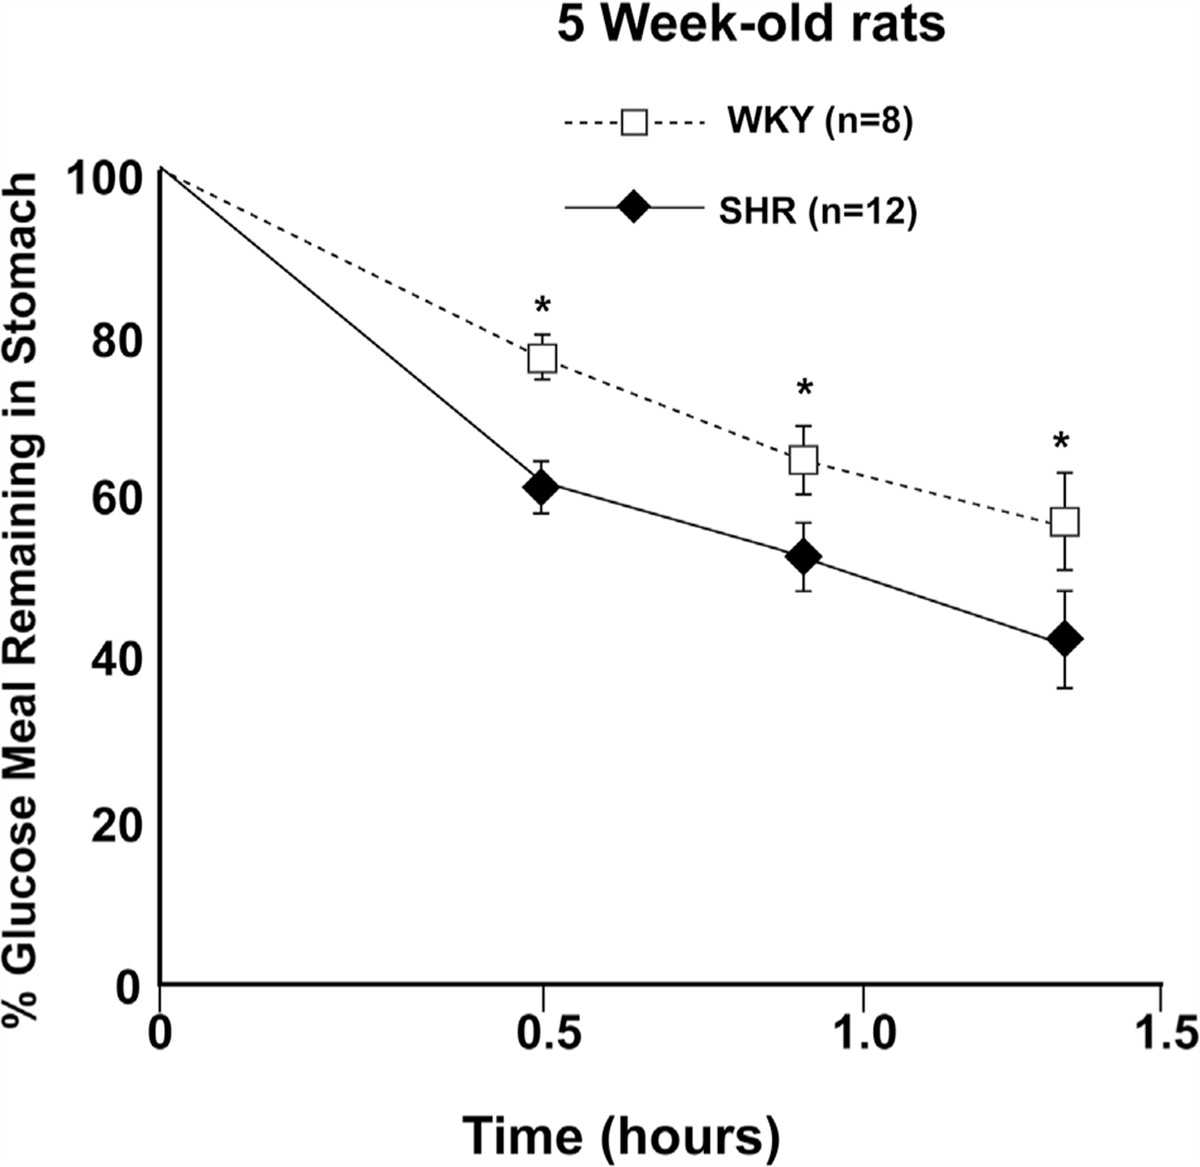 Rapid Gastric emptying in spontaneously hypertensive rats